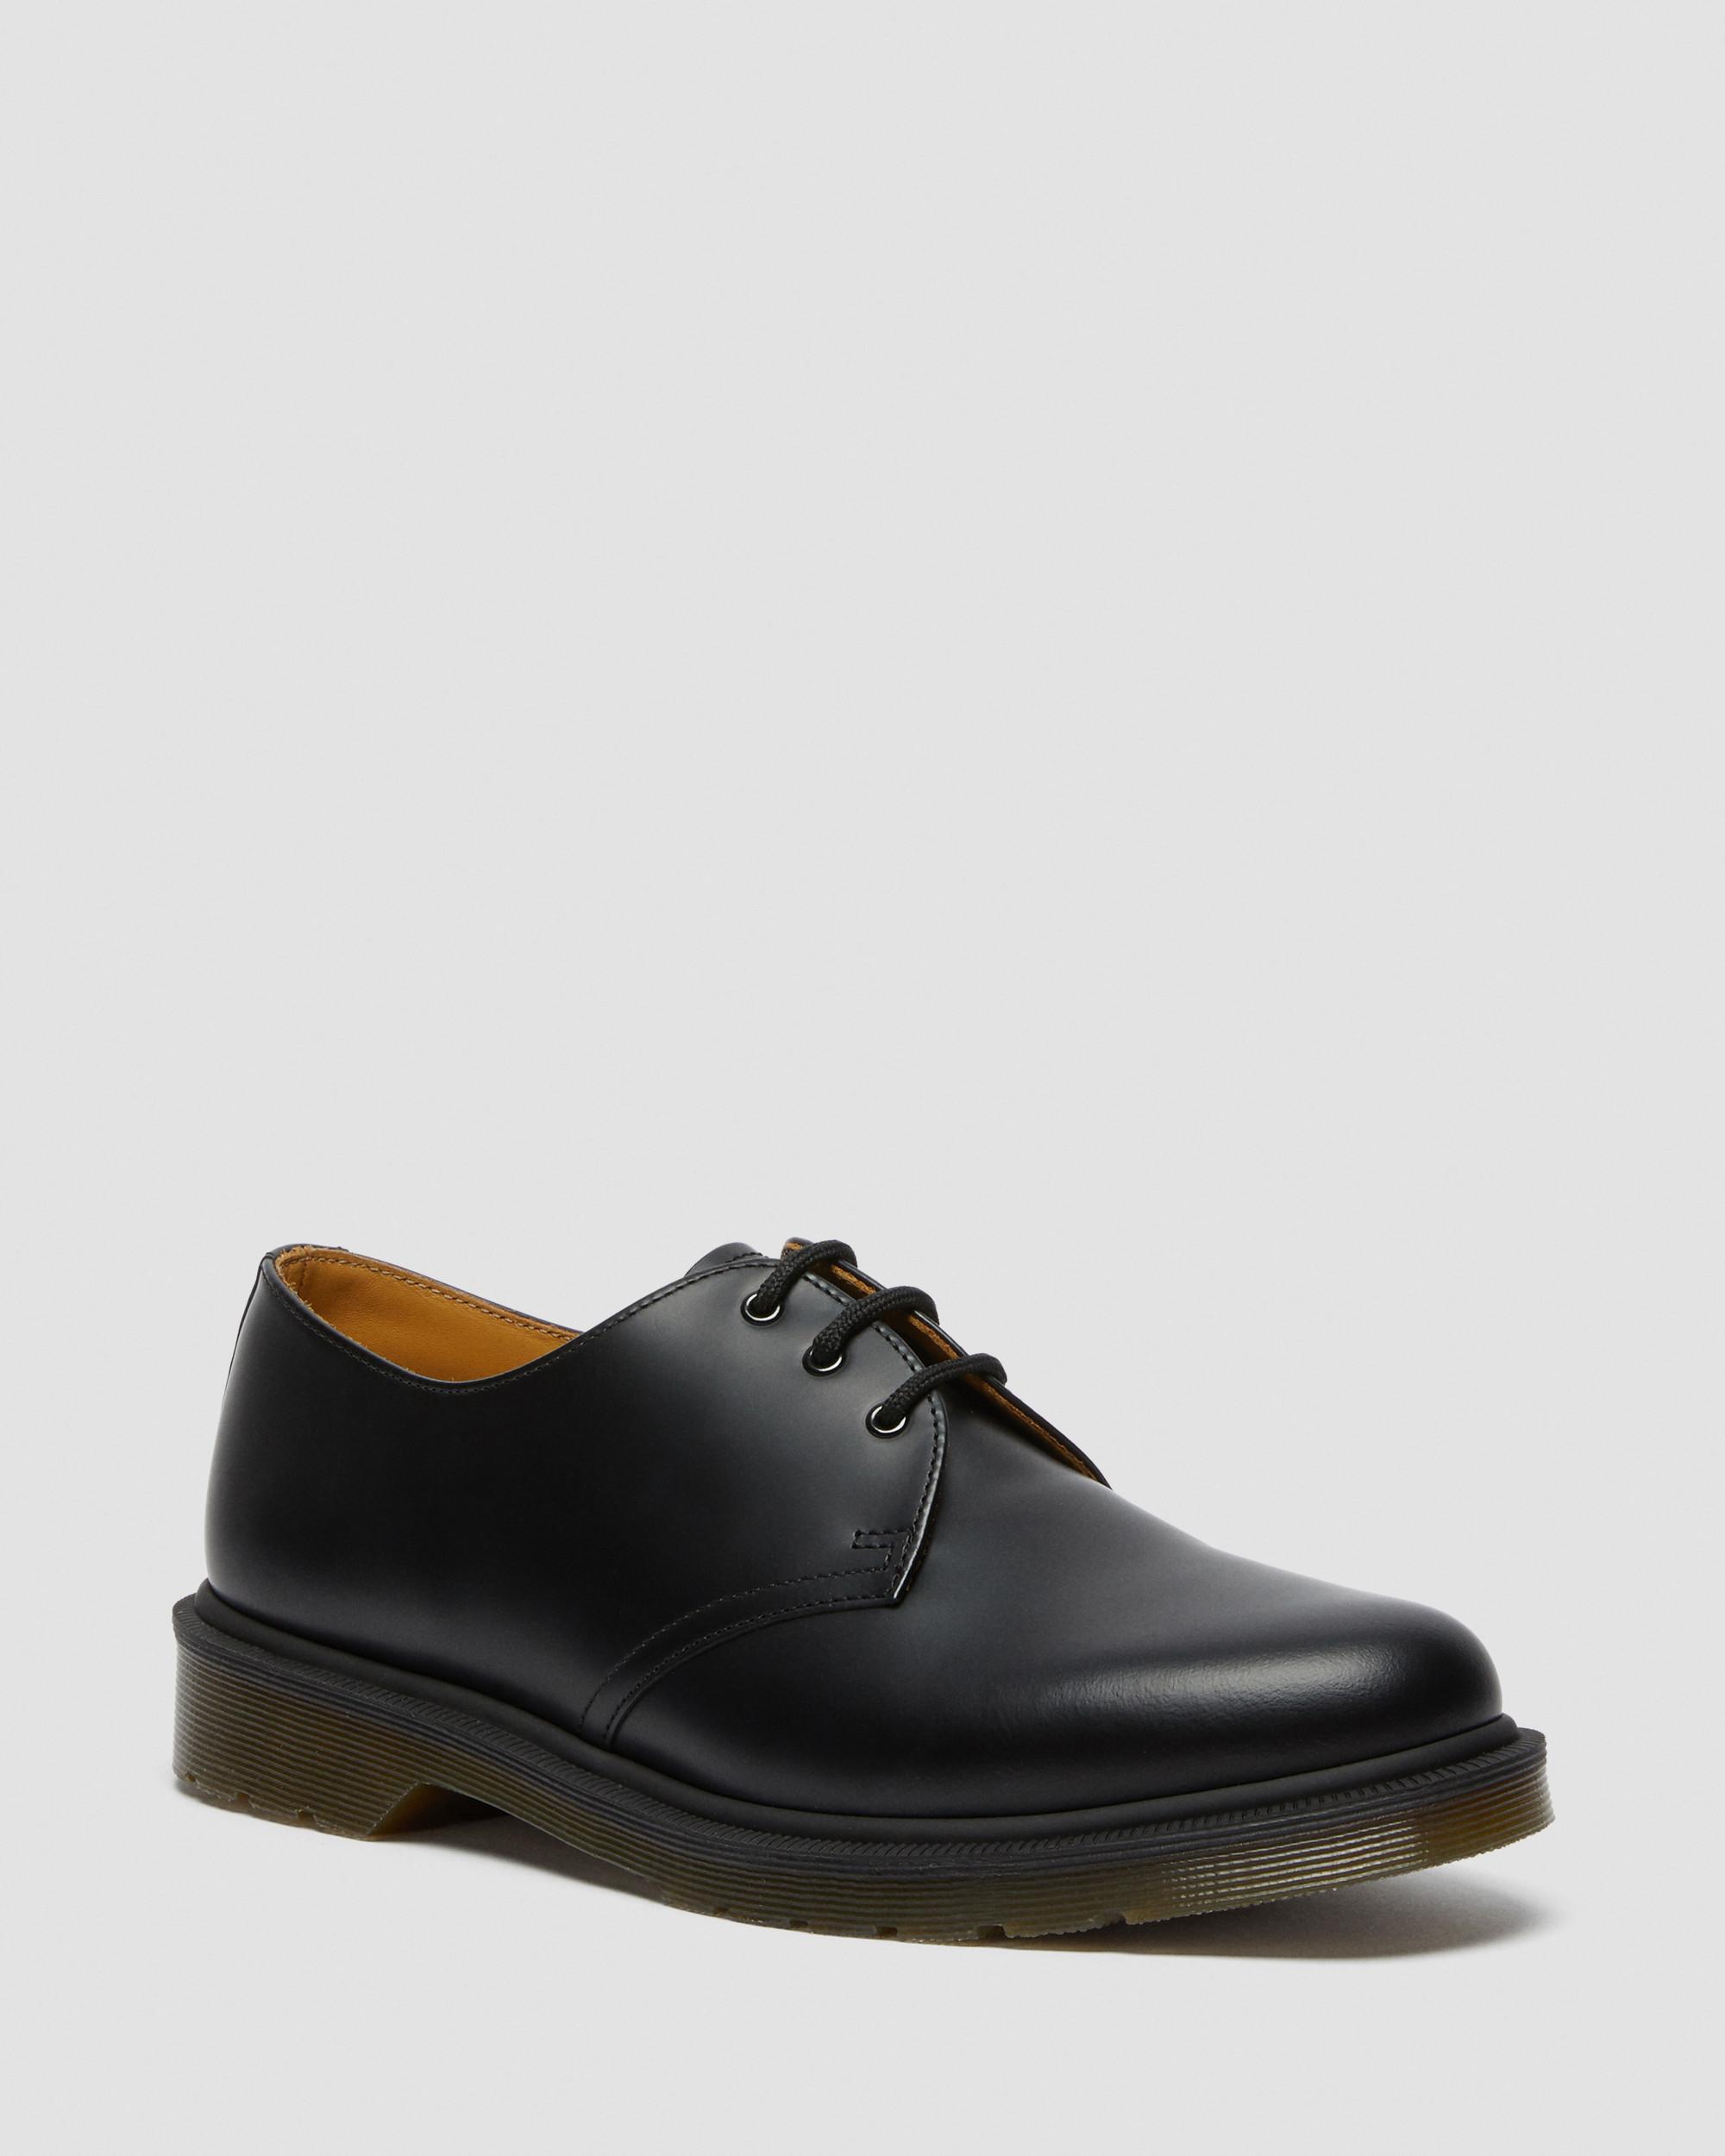 1461 Narrow Plain Welt Smooth Leather Oxford Shoes, Black | Dr. Martens